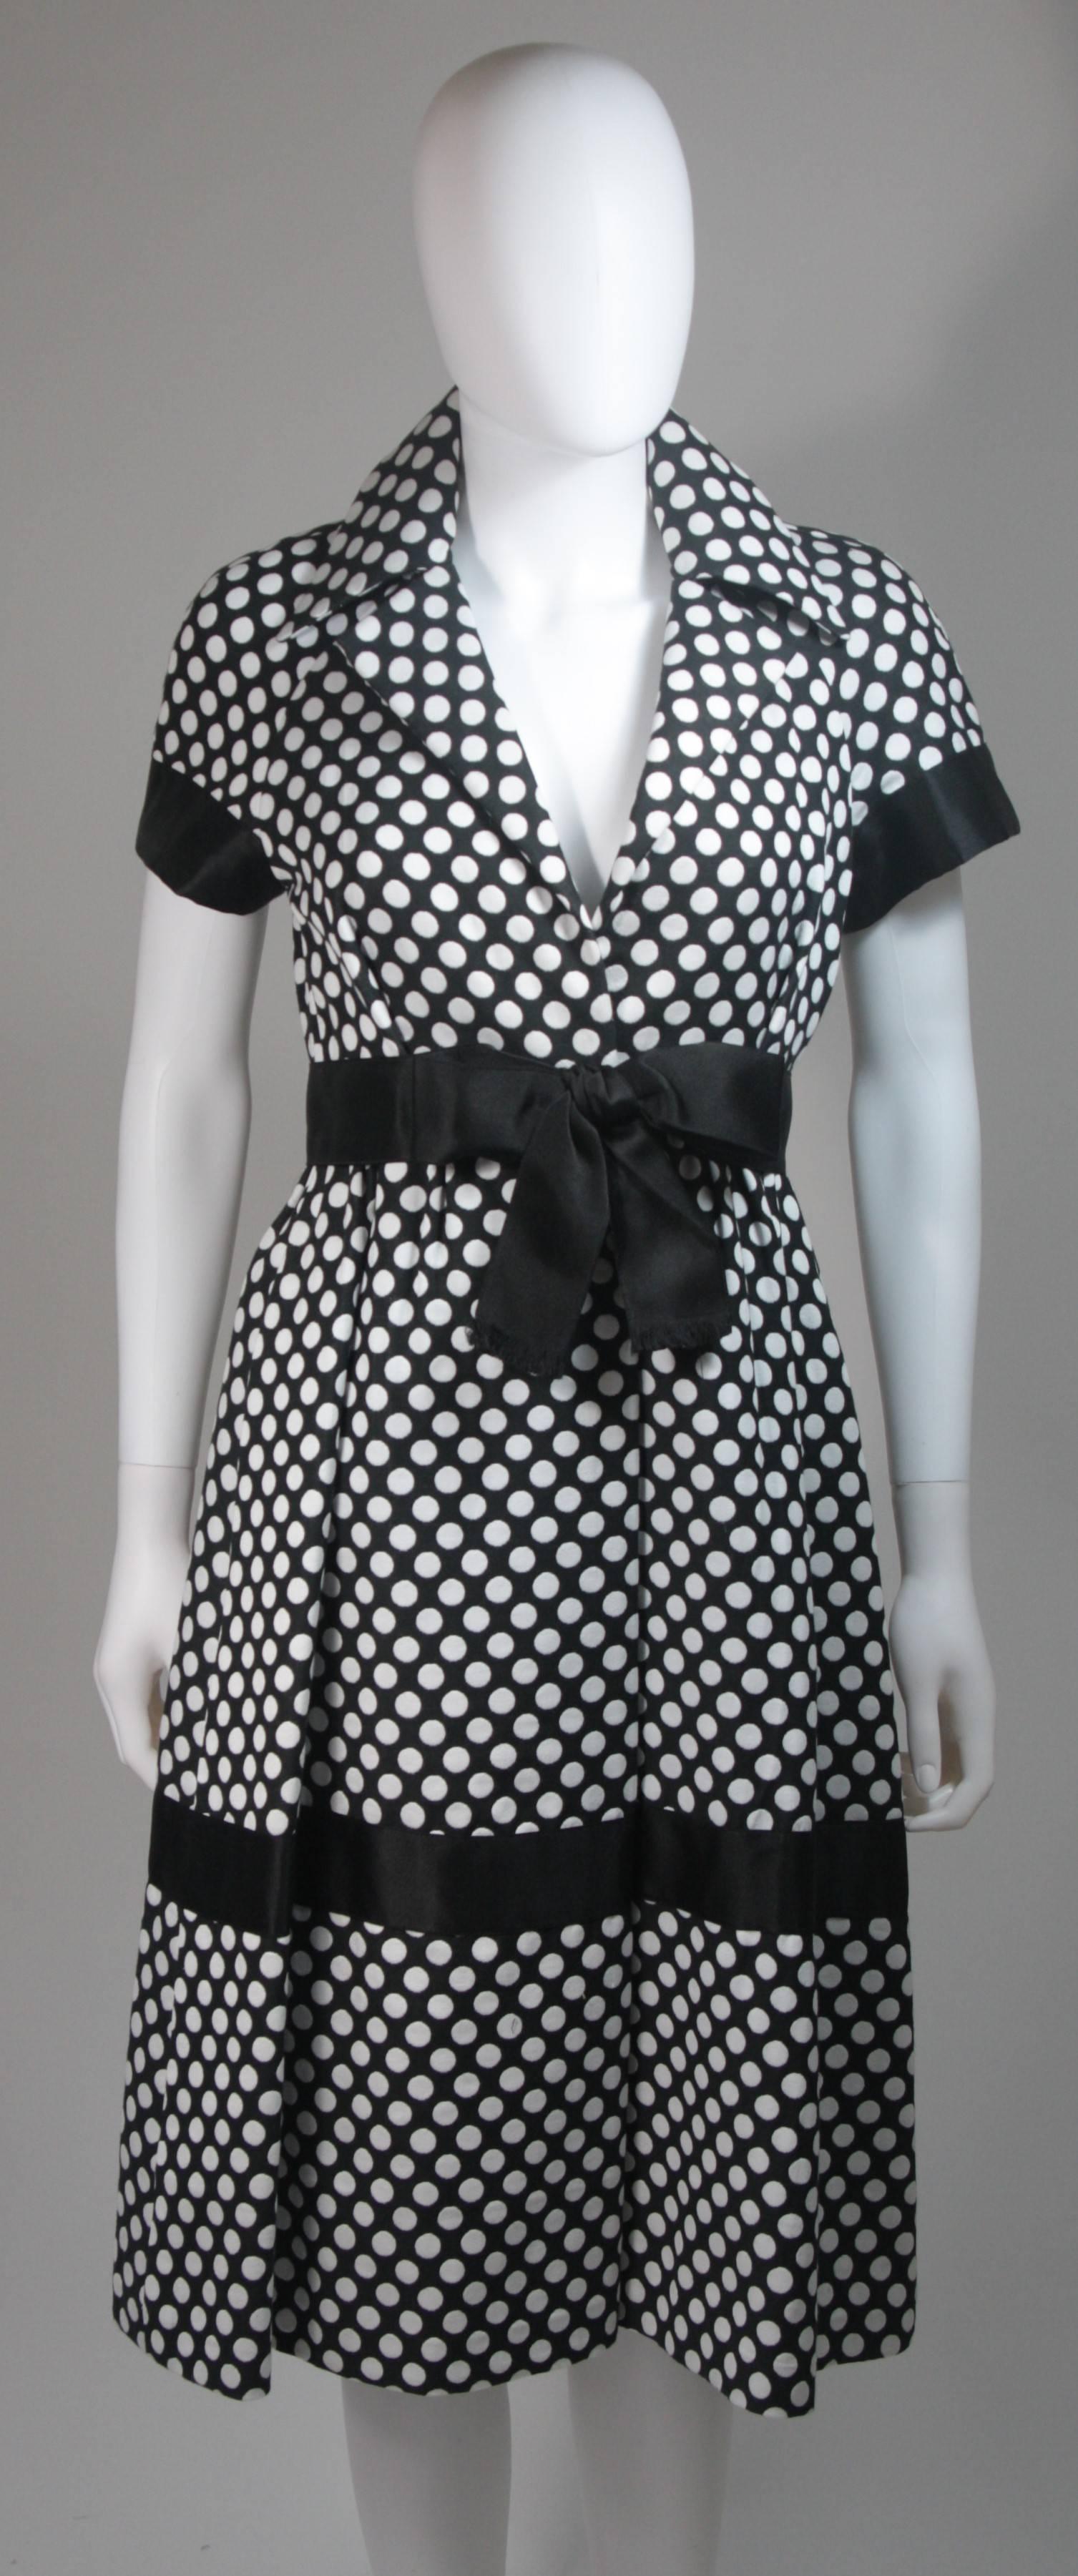 Women's Geoffrey Beene Black and White Polka Dot Dress with Satin Trim Size Small